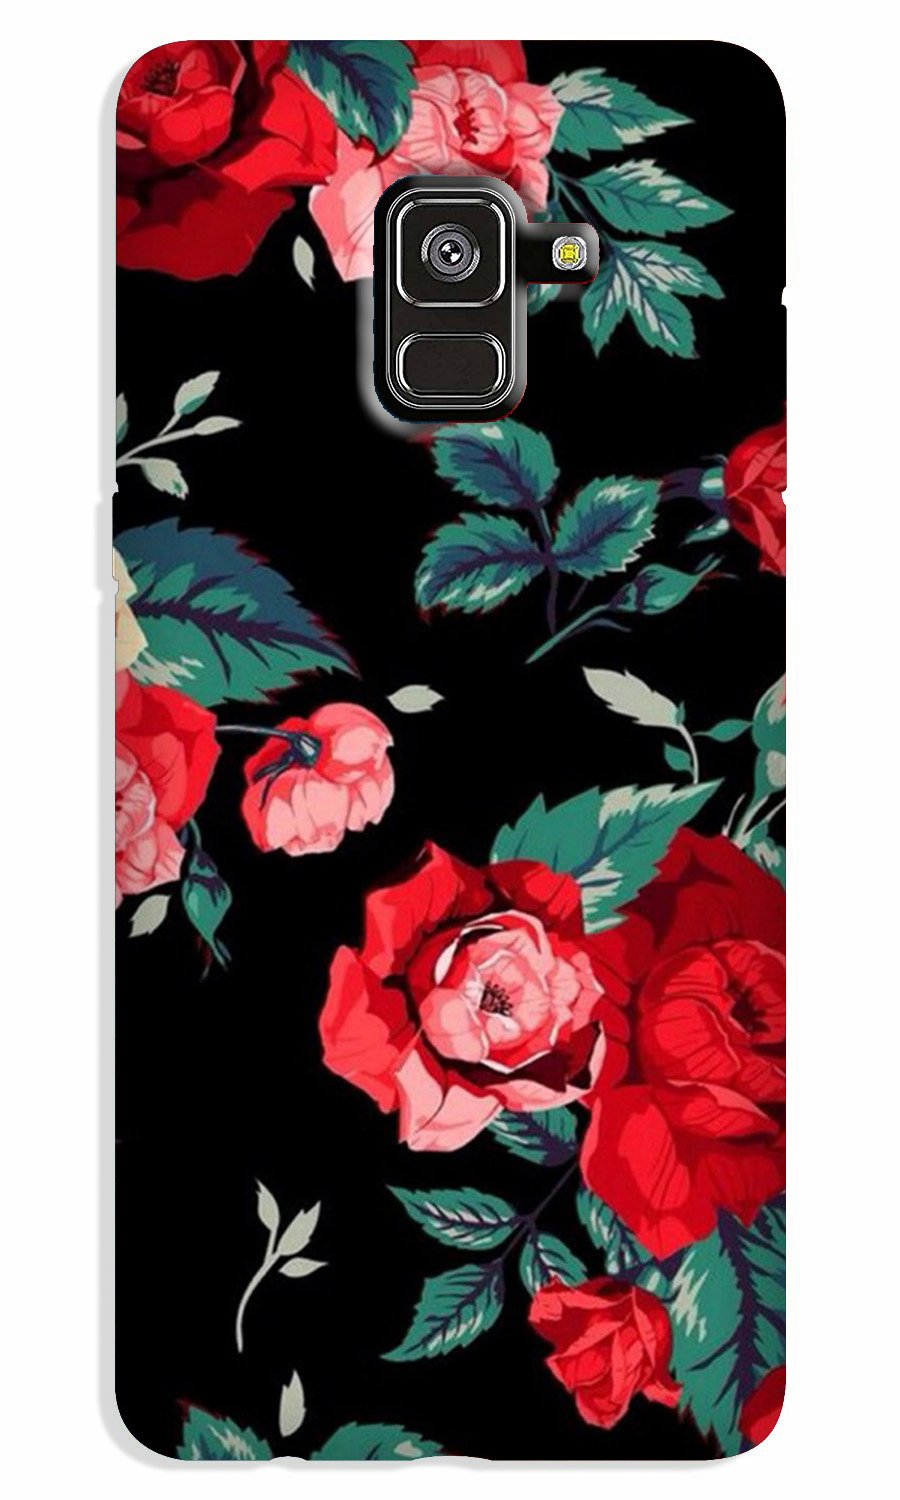 Red Rose2 Case for Galaxy A8 Plus